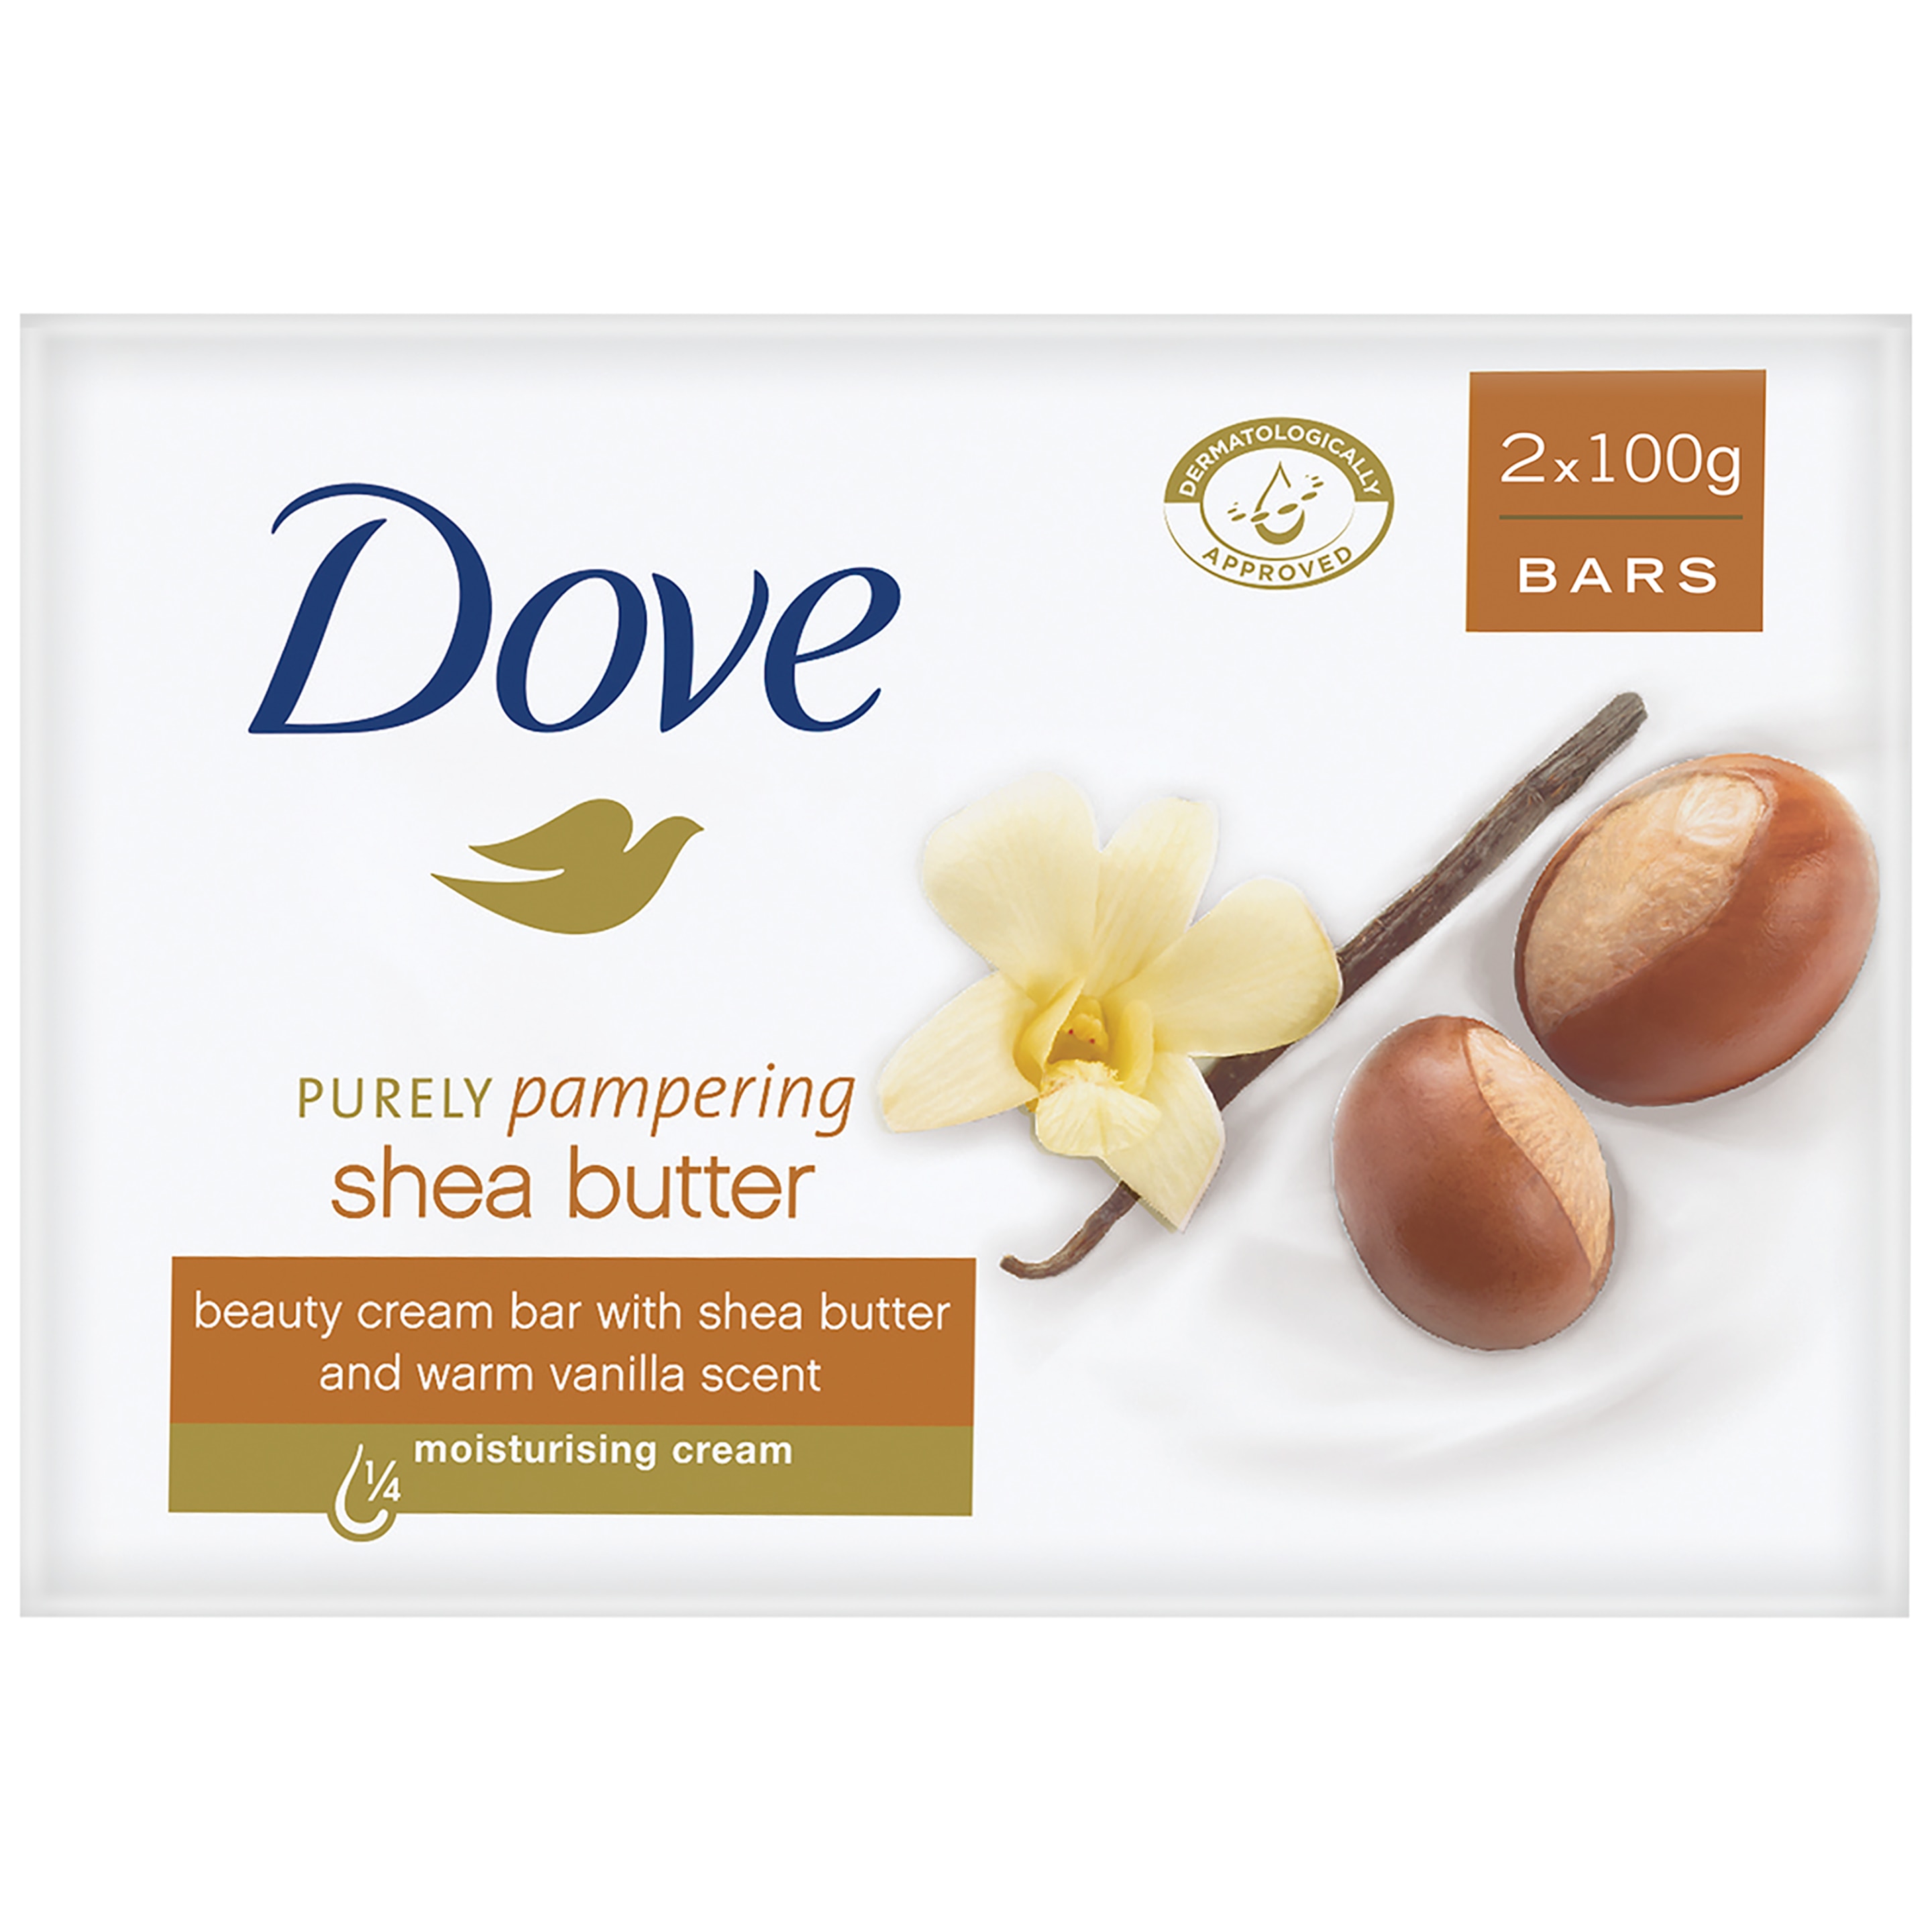 Dove Purely Pampering Shea Butter Beauty Bar 2x90g